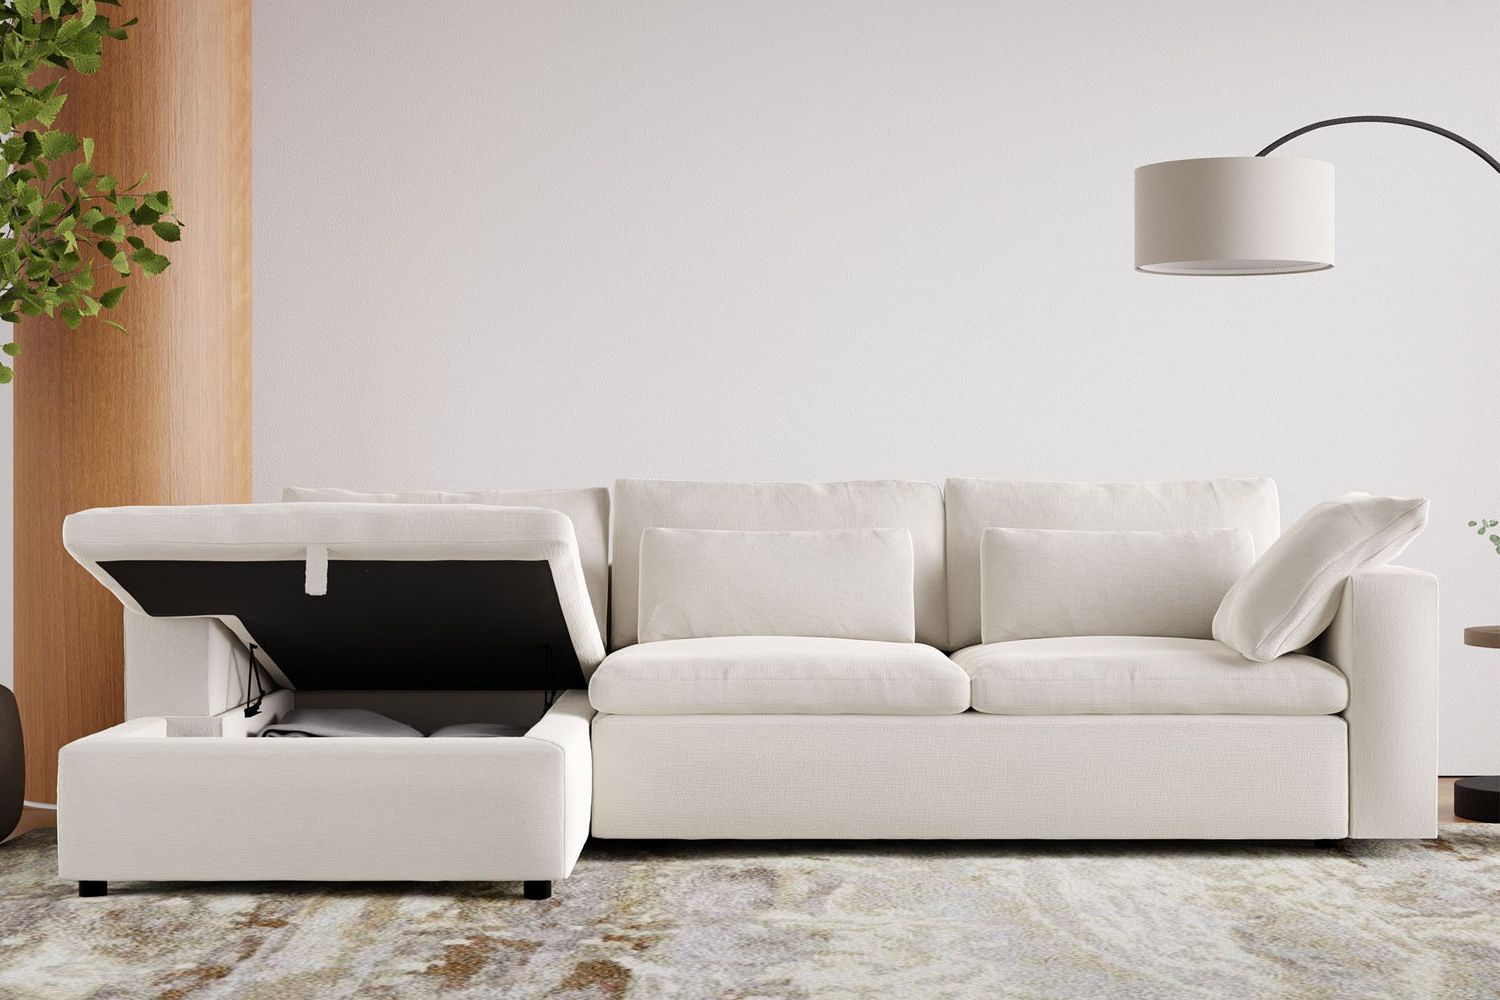 Sectional Sofas With Storage For Families: 10 Easy Pieces With Regard To Sofa Sectionals With Storage (View 10 of 20)